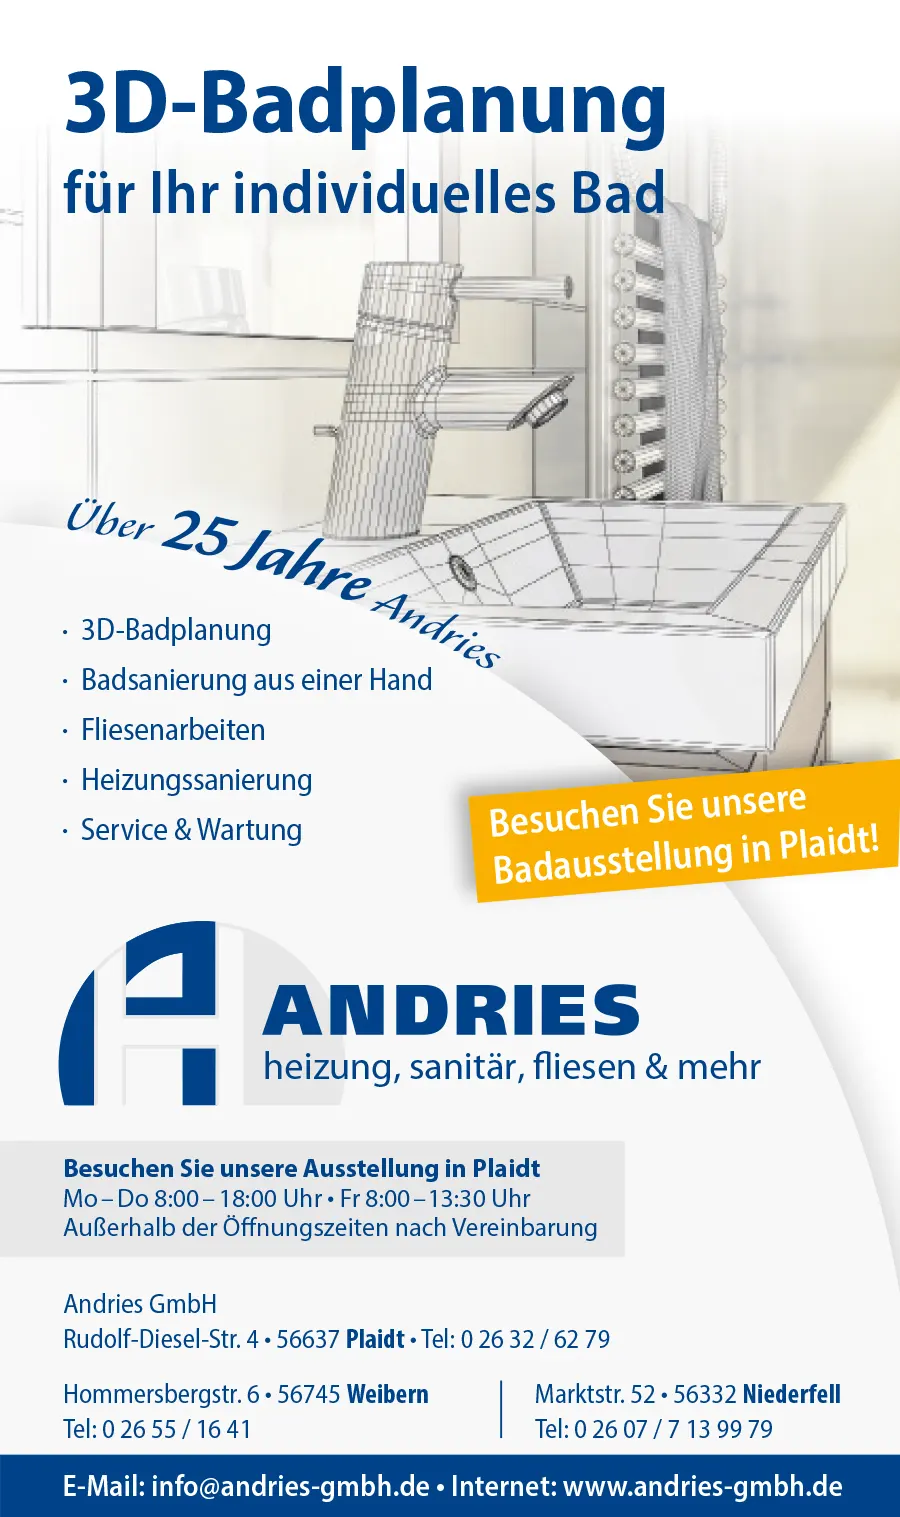 Andries GmbH Anzeige